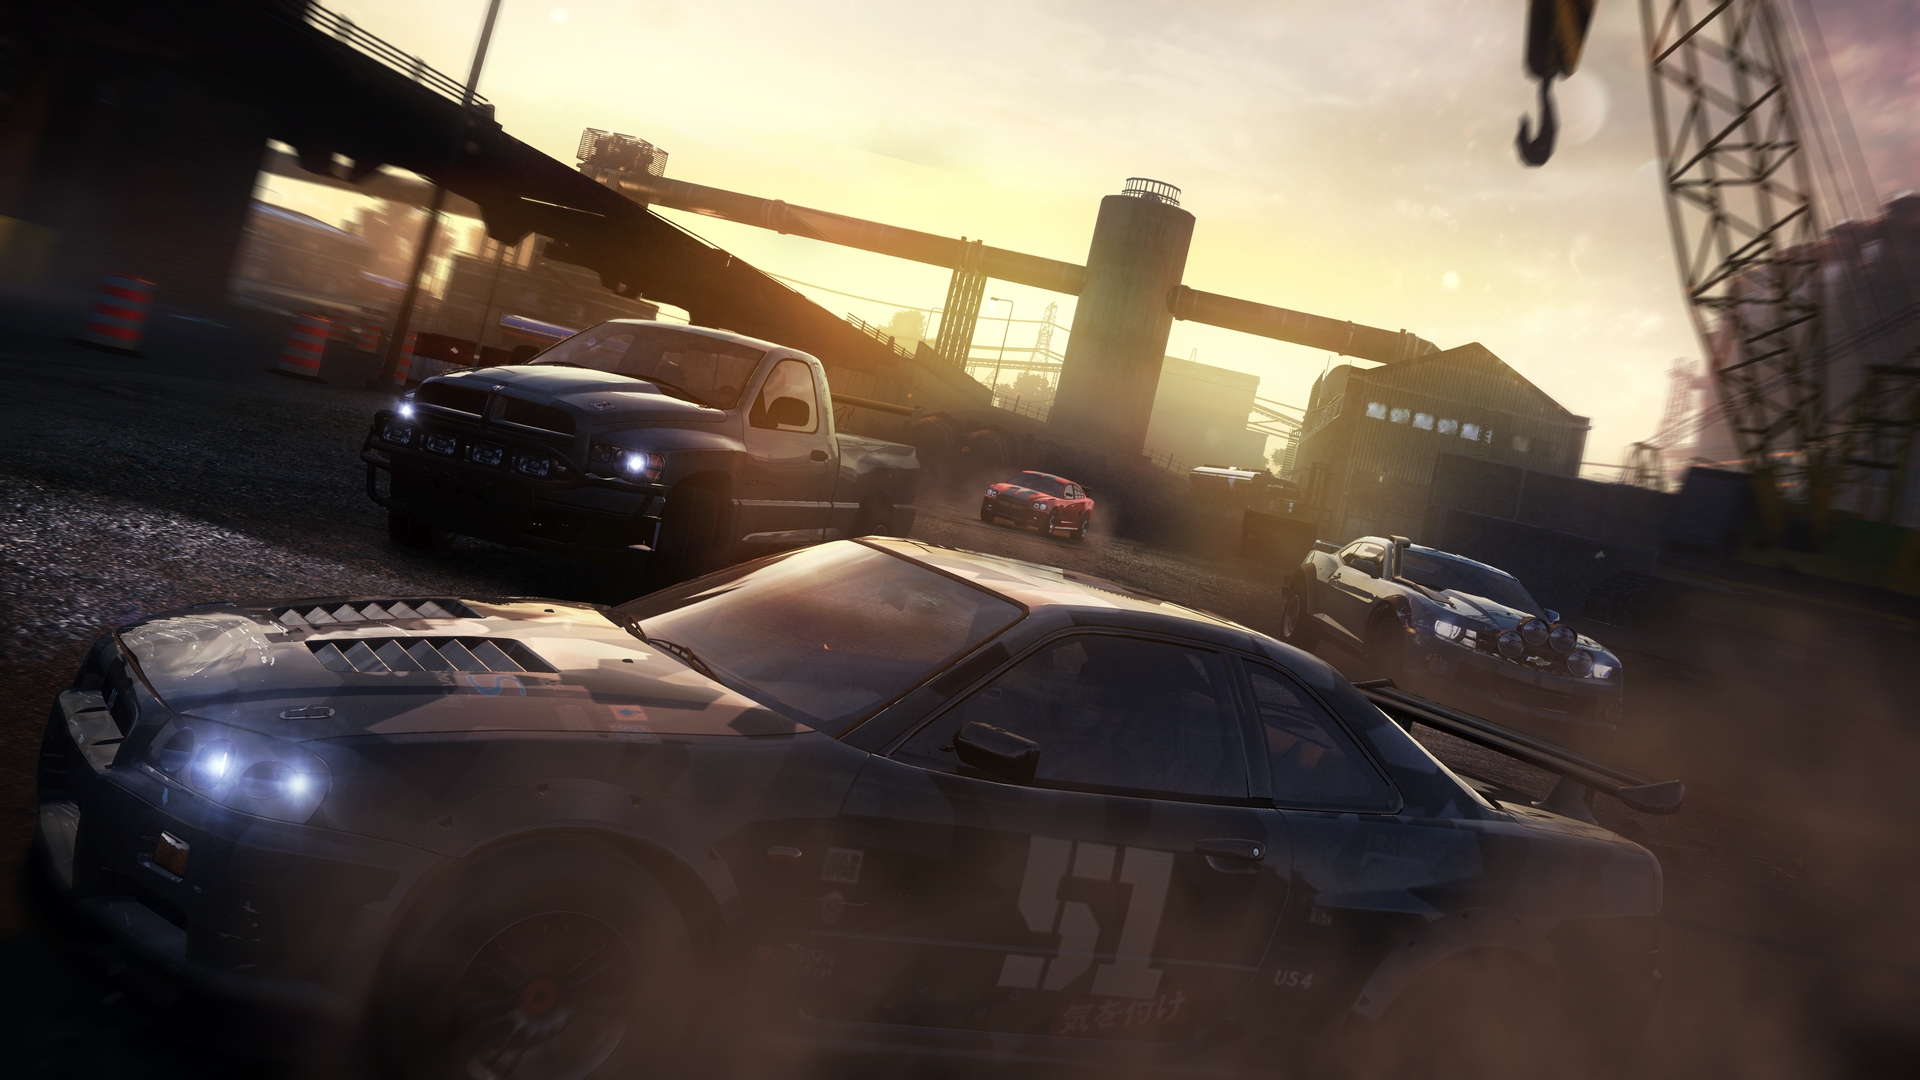 The Crew System Requirements - Can I Run It? - PCGameBenchmark